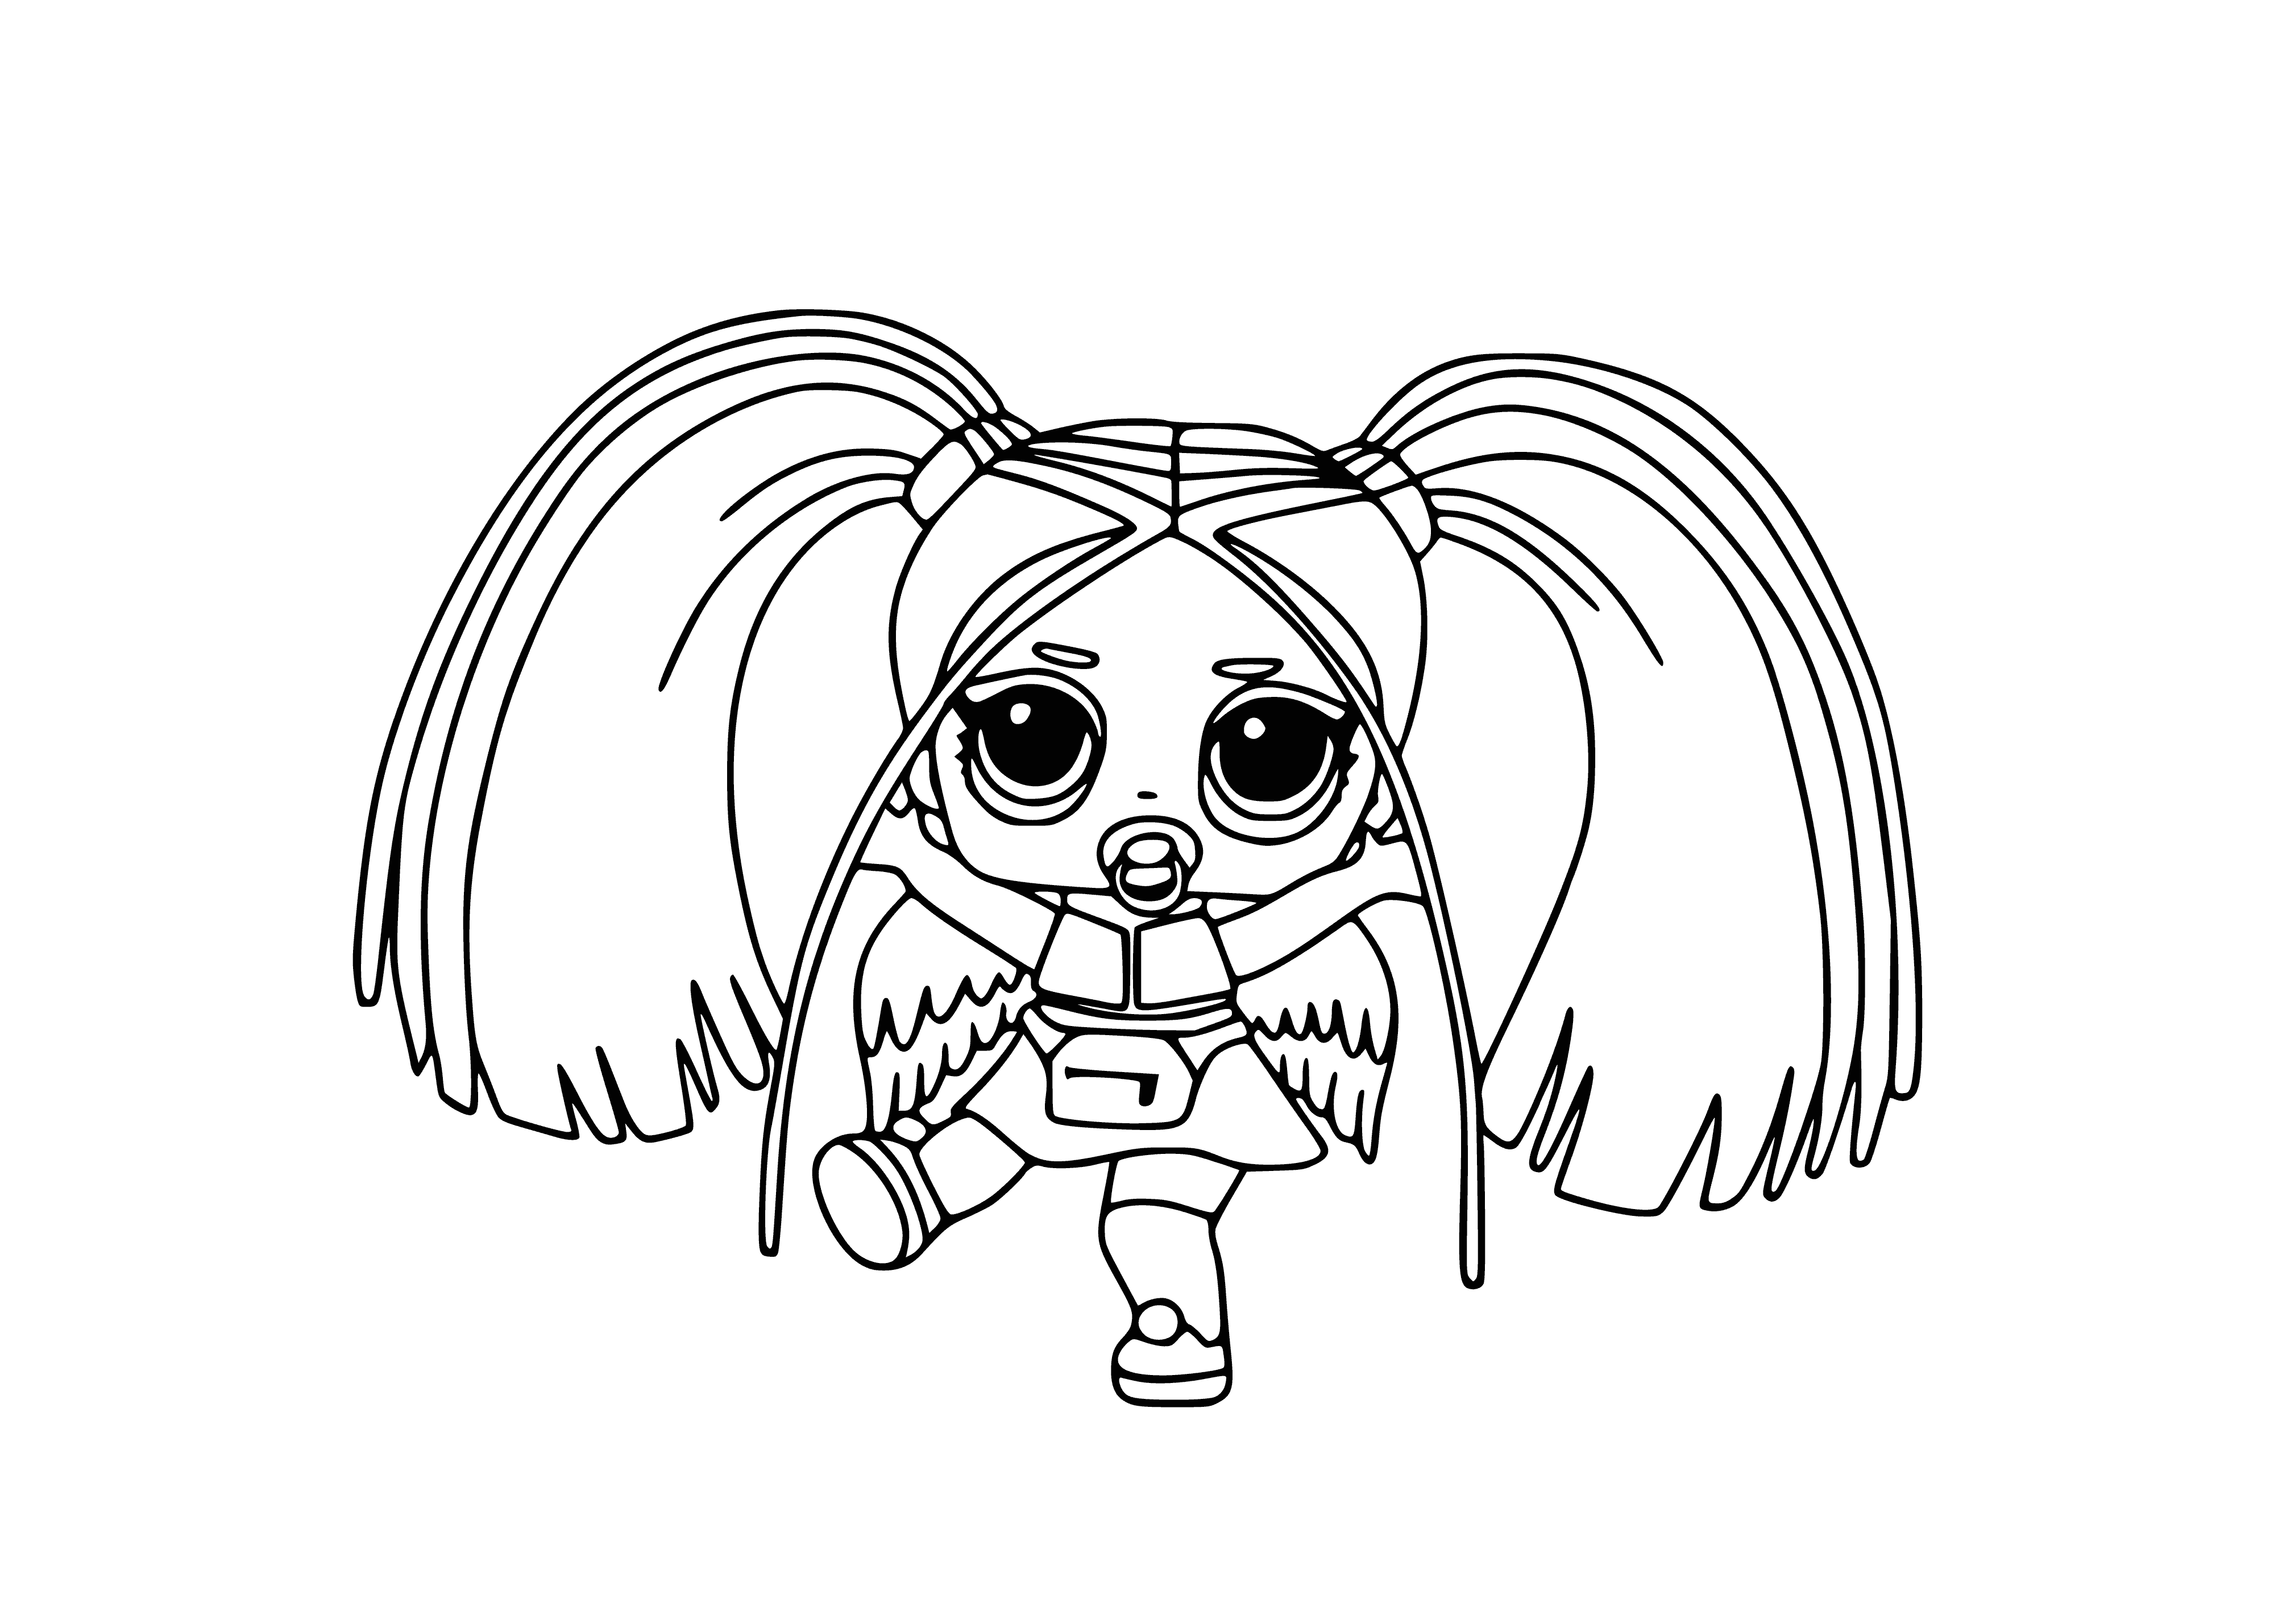 coloring page: This bright and buzzing toy, the LOL Rainbow Raver, is sure to keep any child entertained. Color it in!